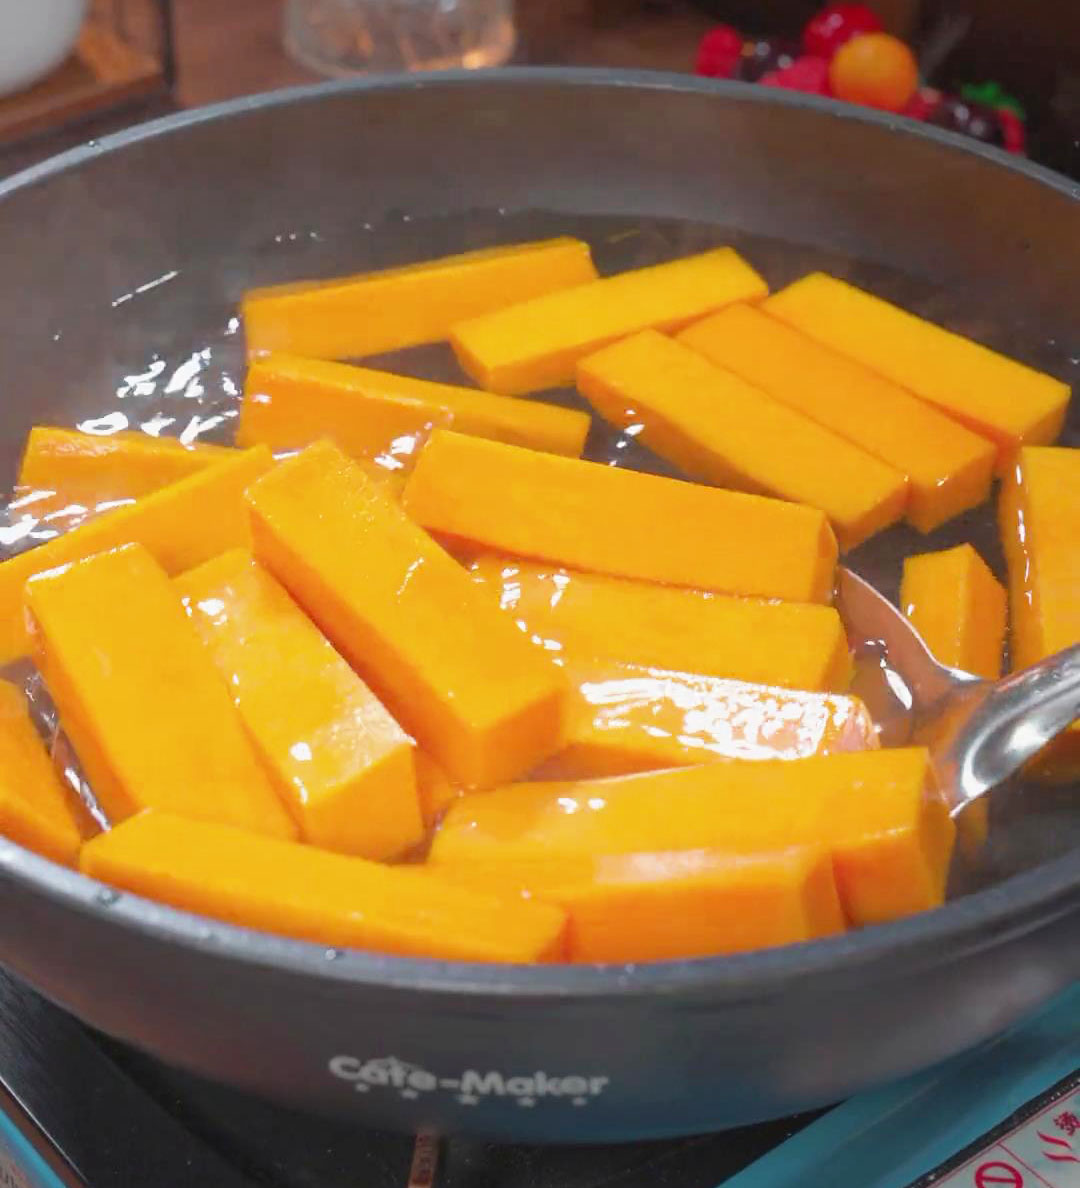 boil the pumpkin slices for 30 seconds